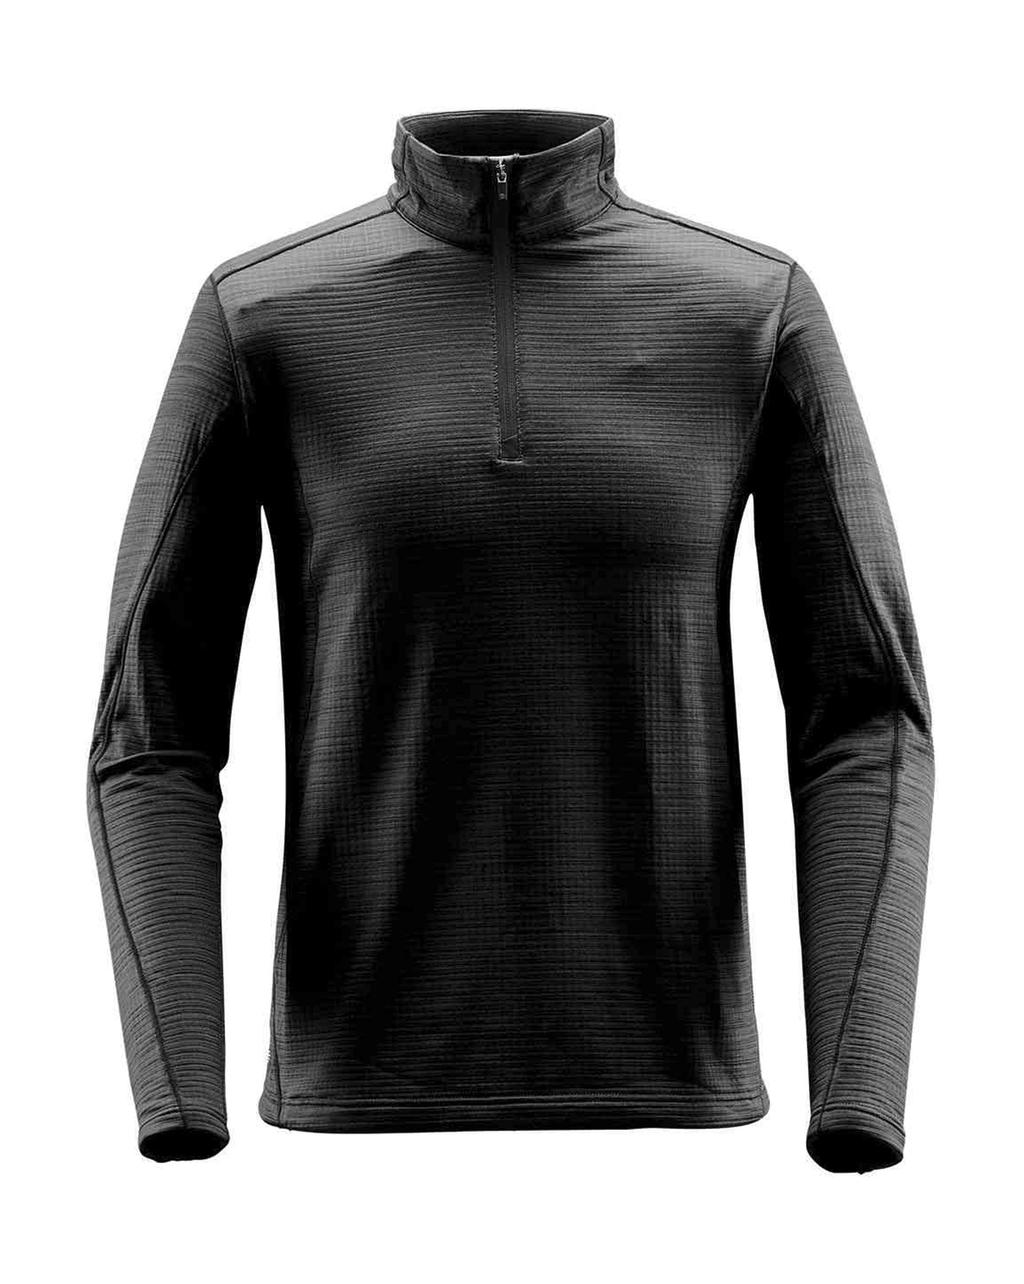  Mens Base Thermal 1/4 Zip in Farbe Dolphin